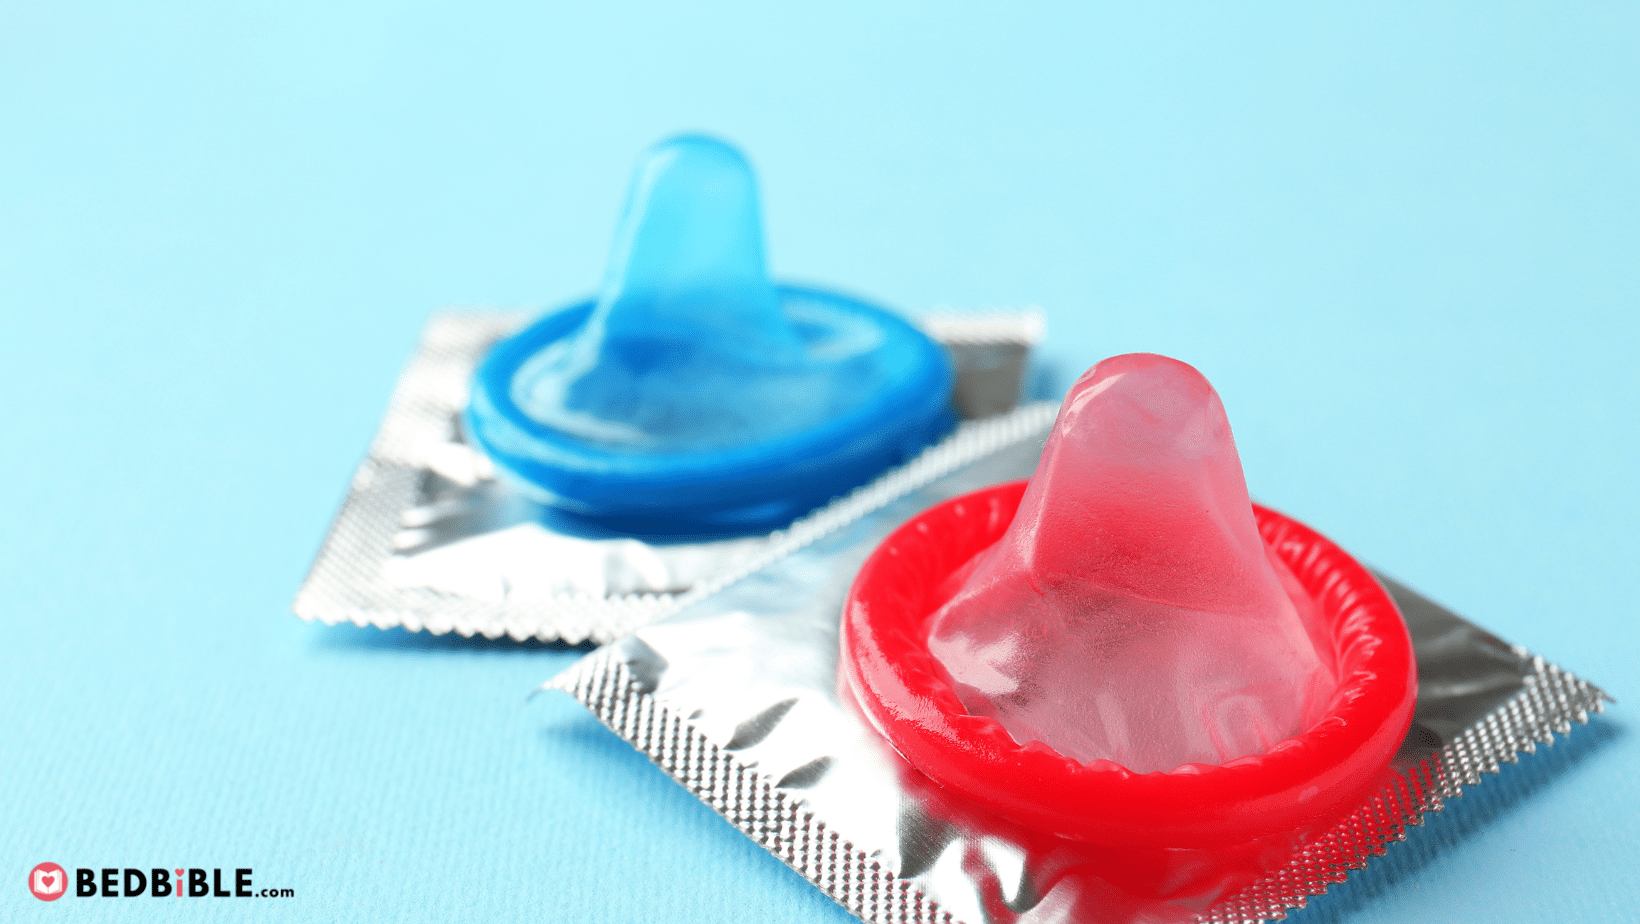 Condom Market Size [Facts, Figures & Numbers]